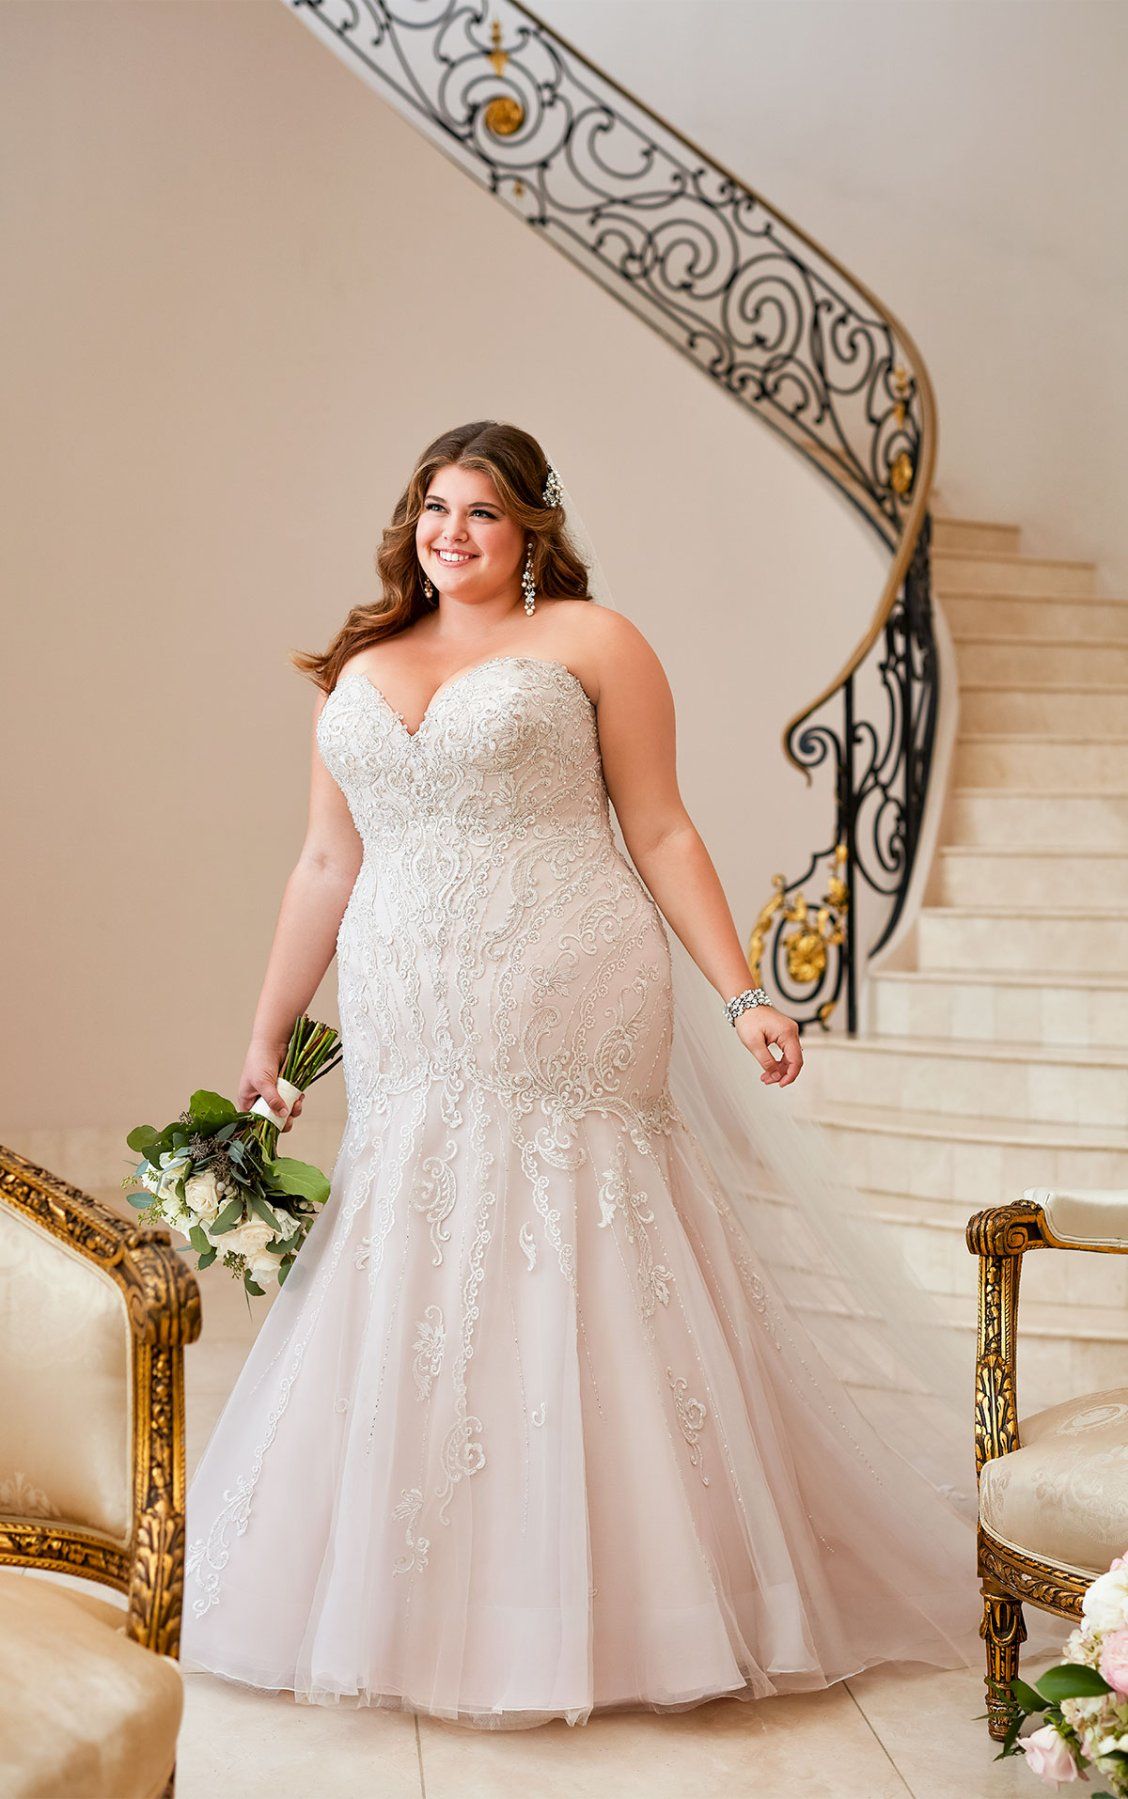 Mermaid Wedding Dress with Glamorous Lace | Plus wedding dresses, Wedding dress trends, Plus size wedding gowns